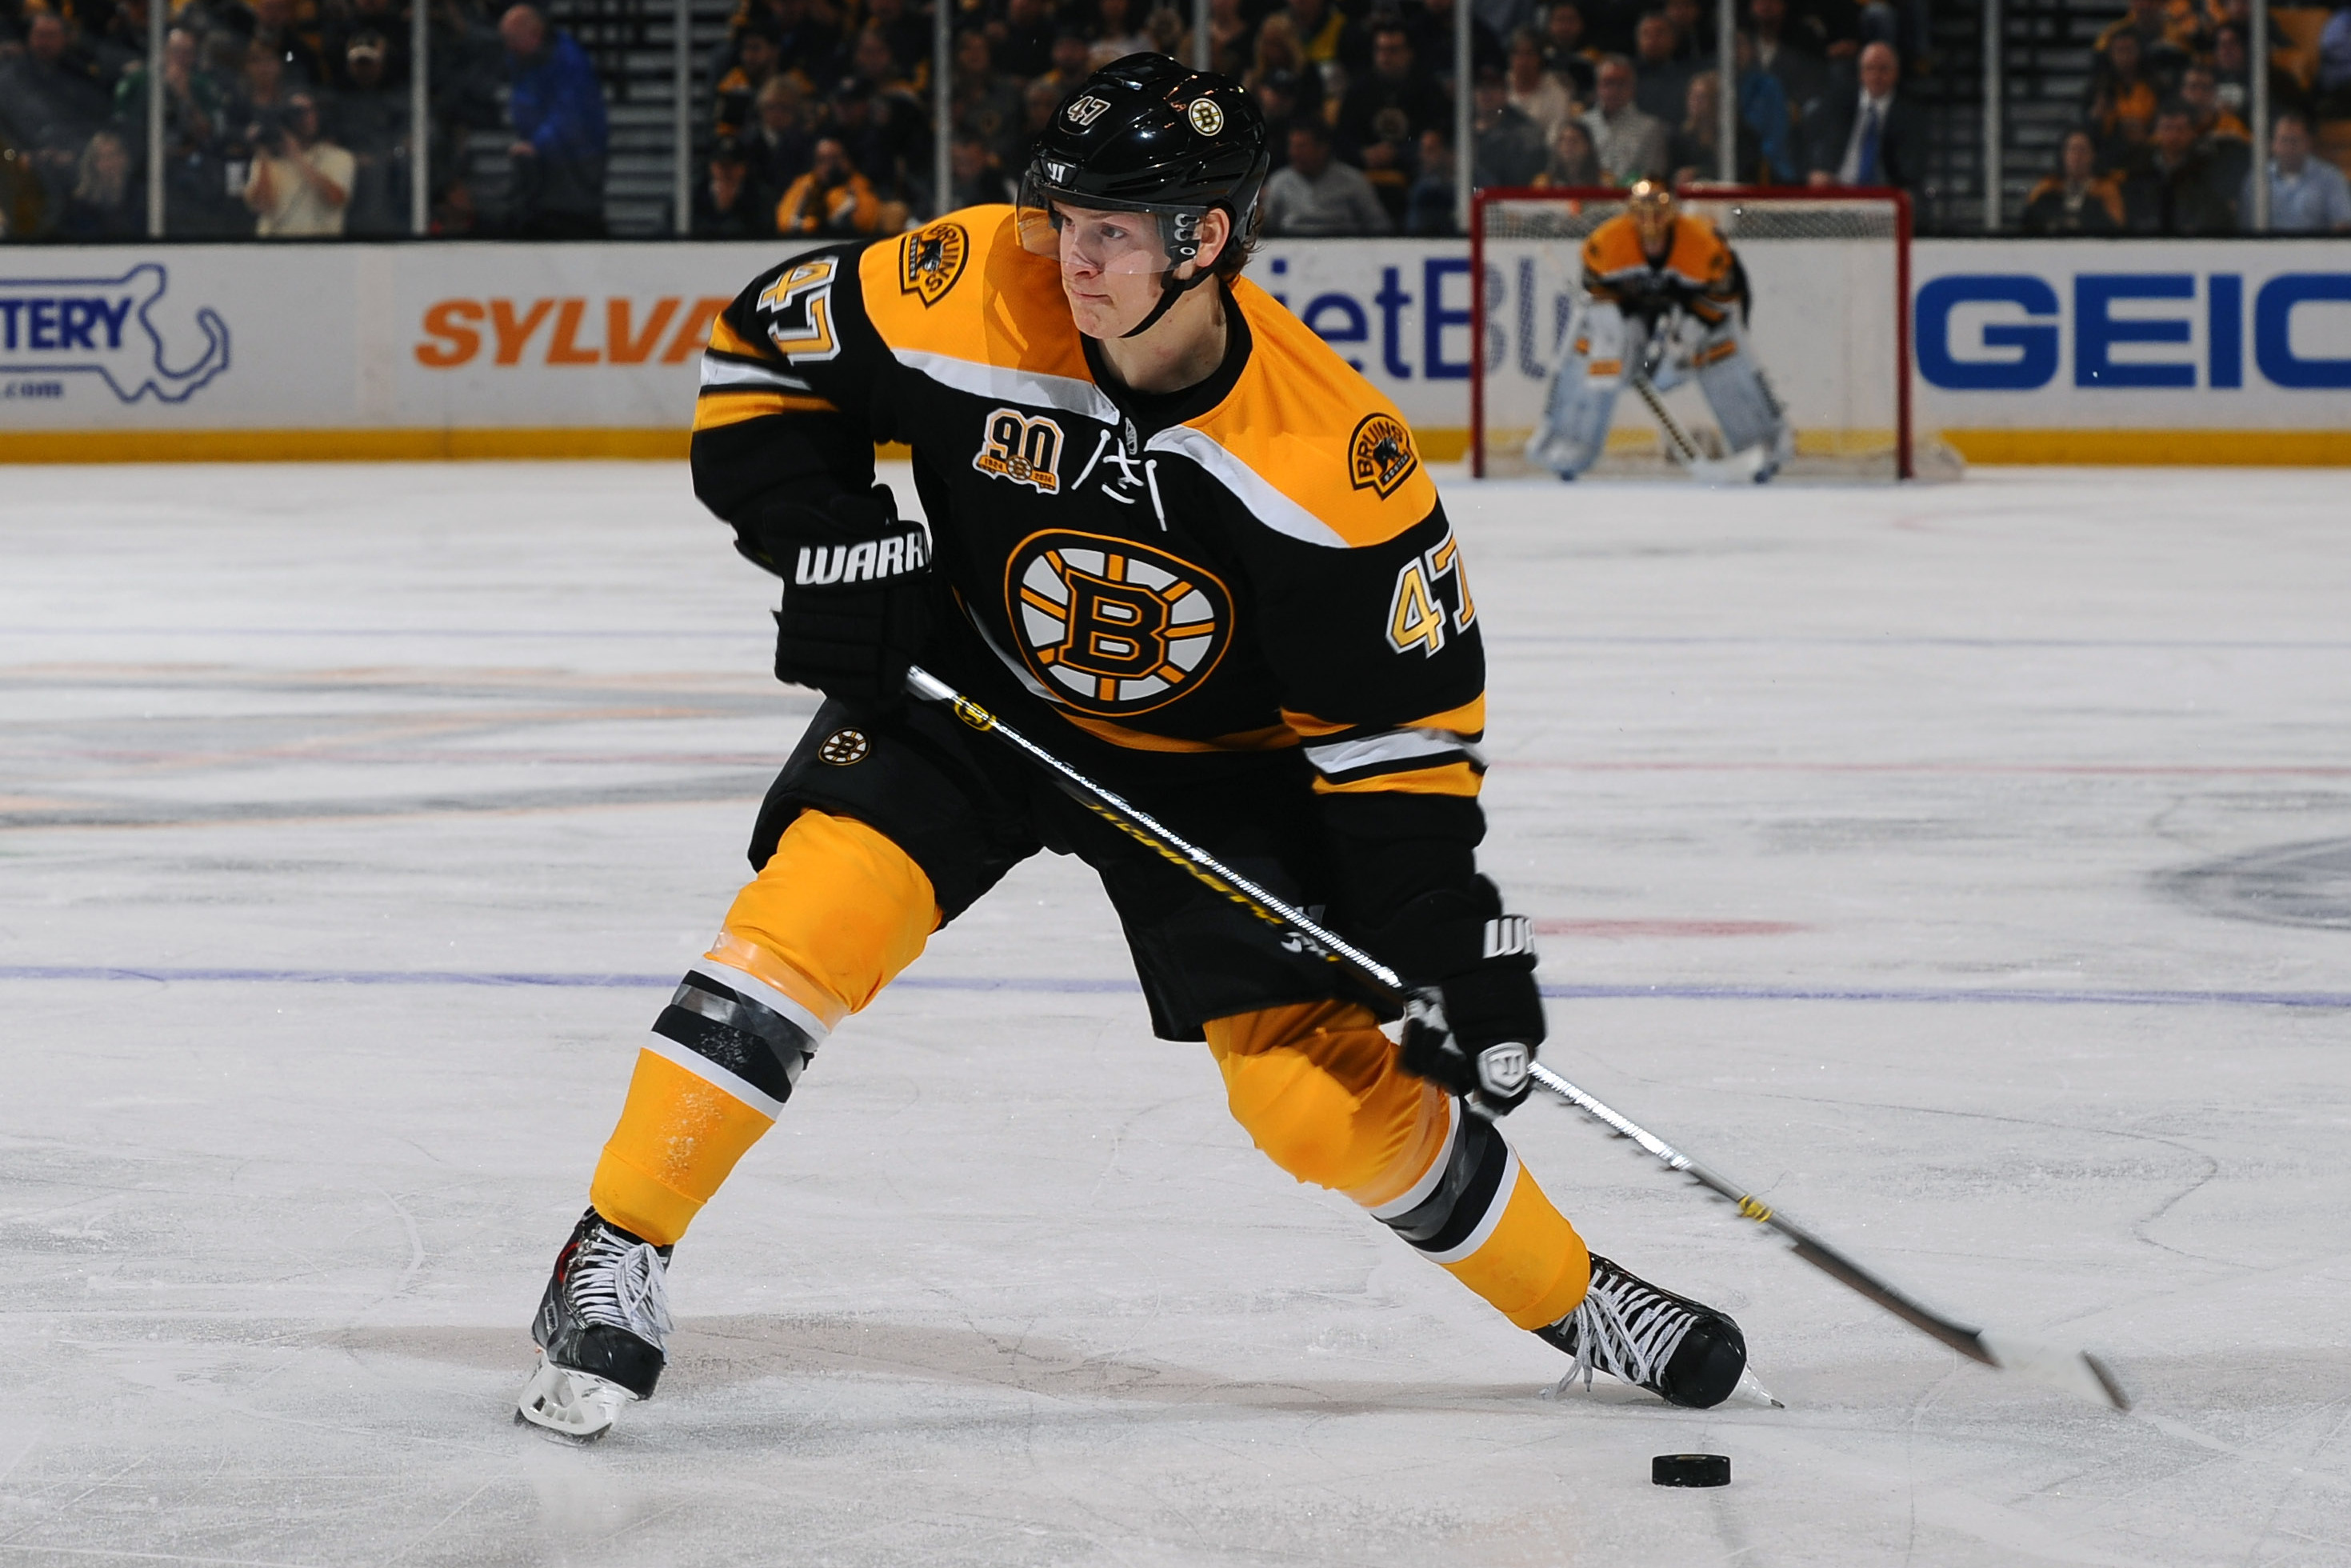 Bruins were glad to see old friend Torey Krug back in town with the Blues -  The Boston Globe